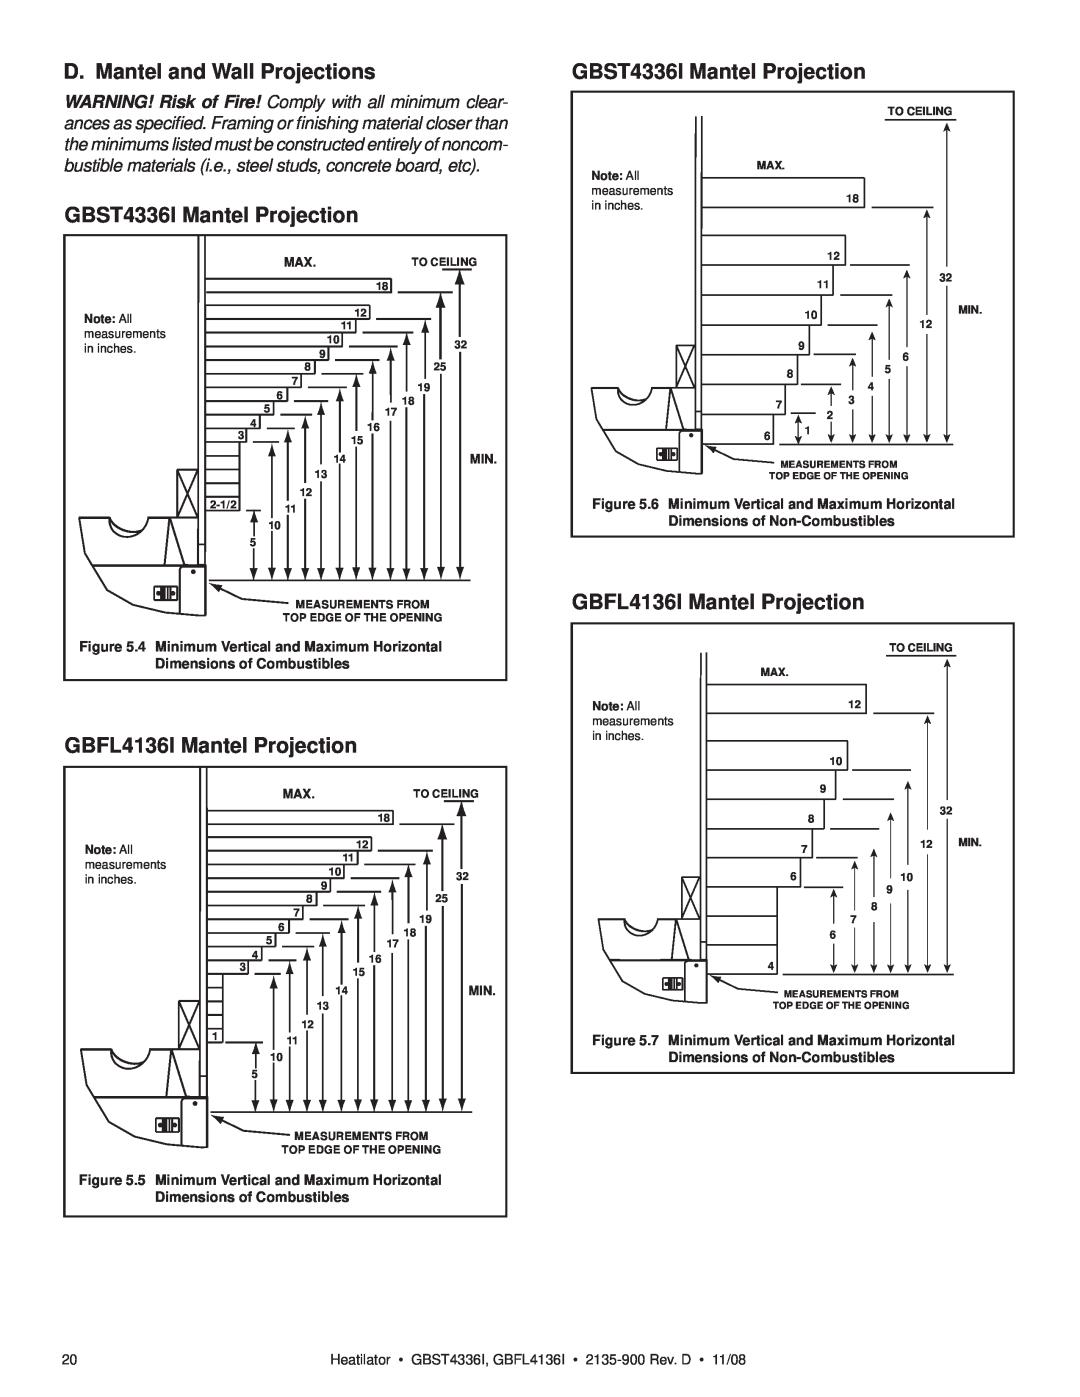 Hearth and Home Technologies GBFL4136I owner manual D. Mantel and Wall Projections, GBST4336I Mantel Projection 